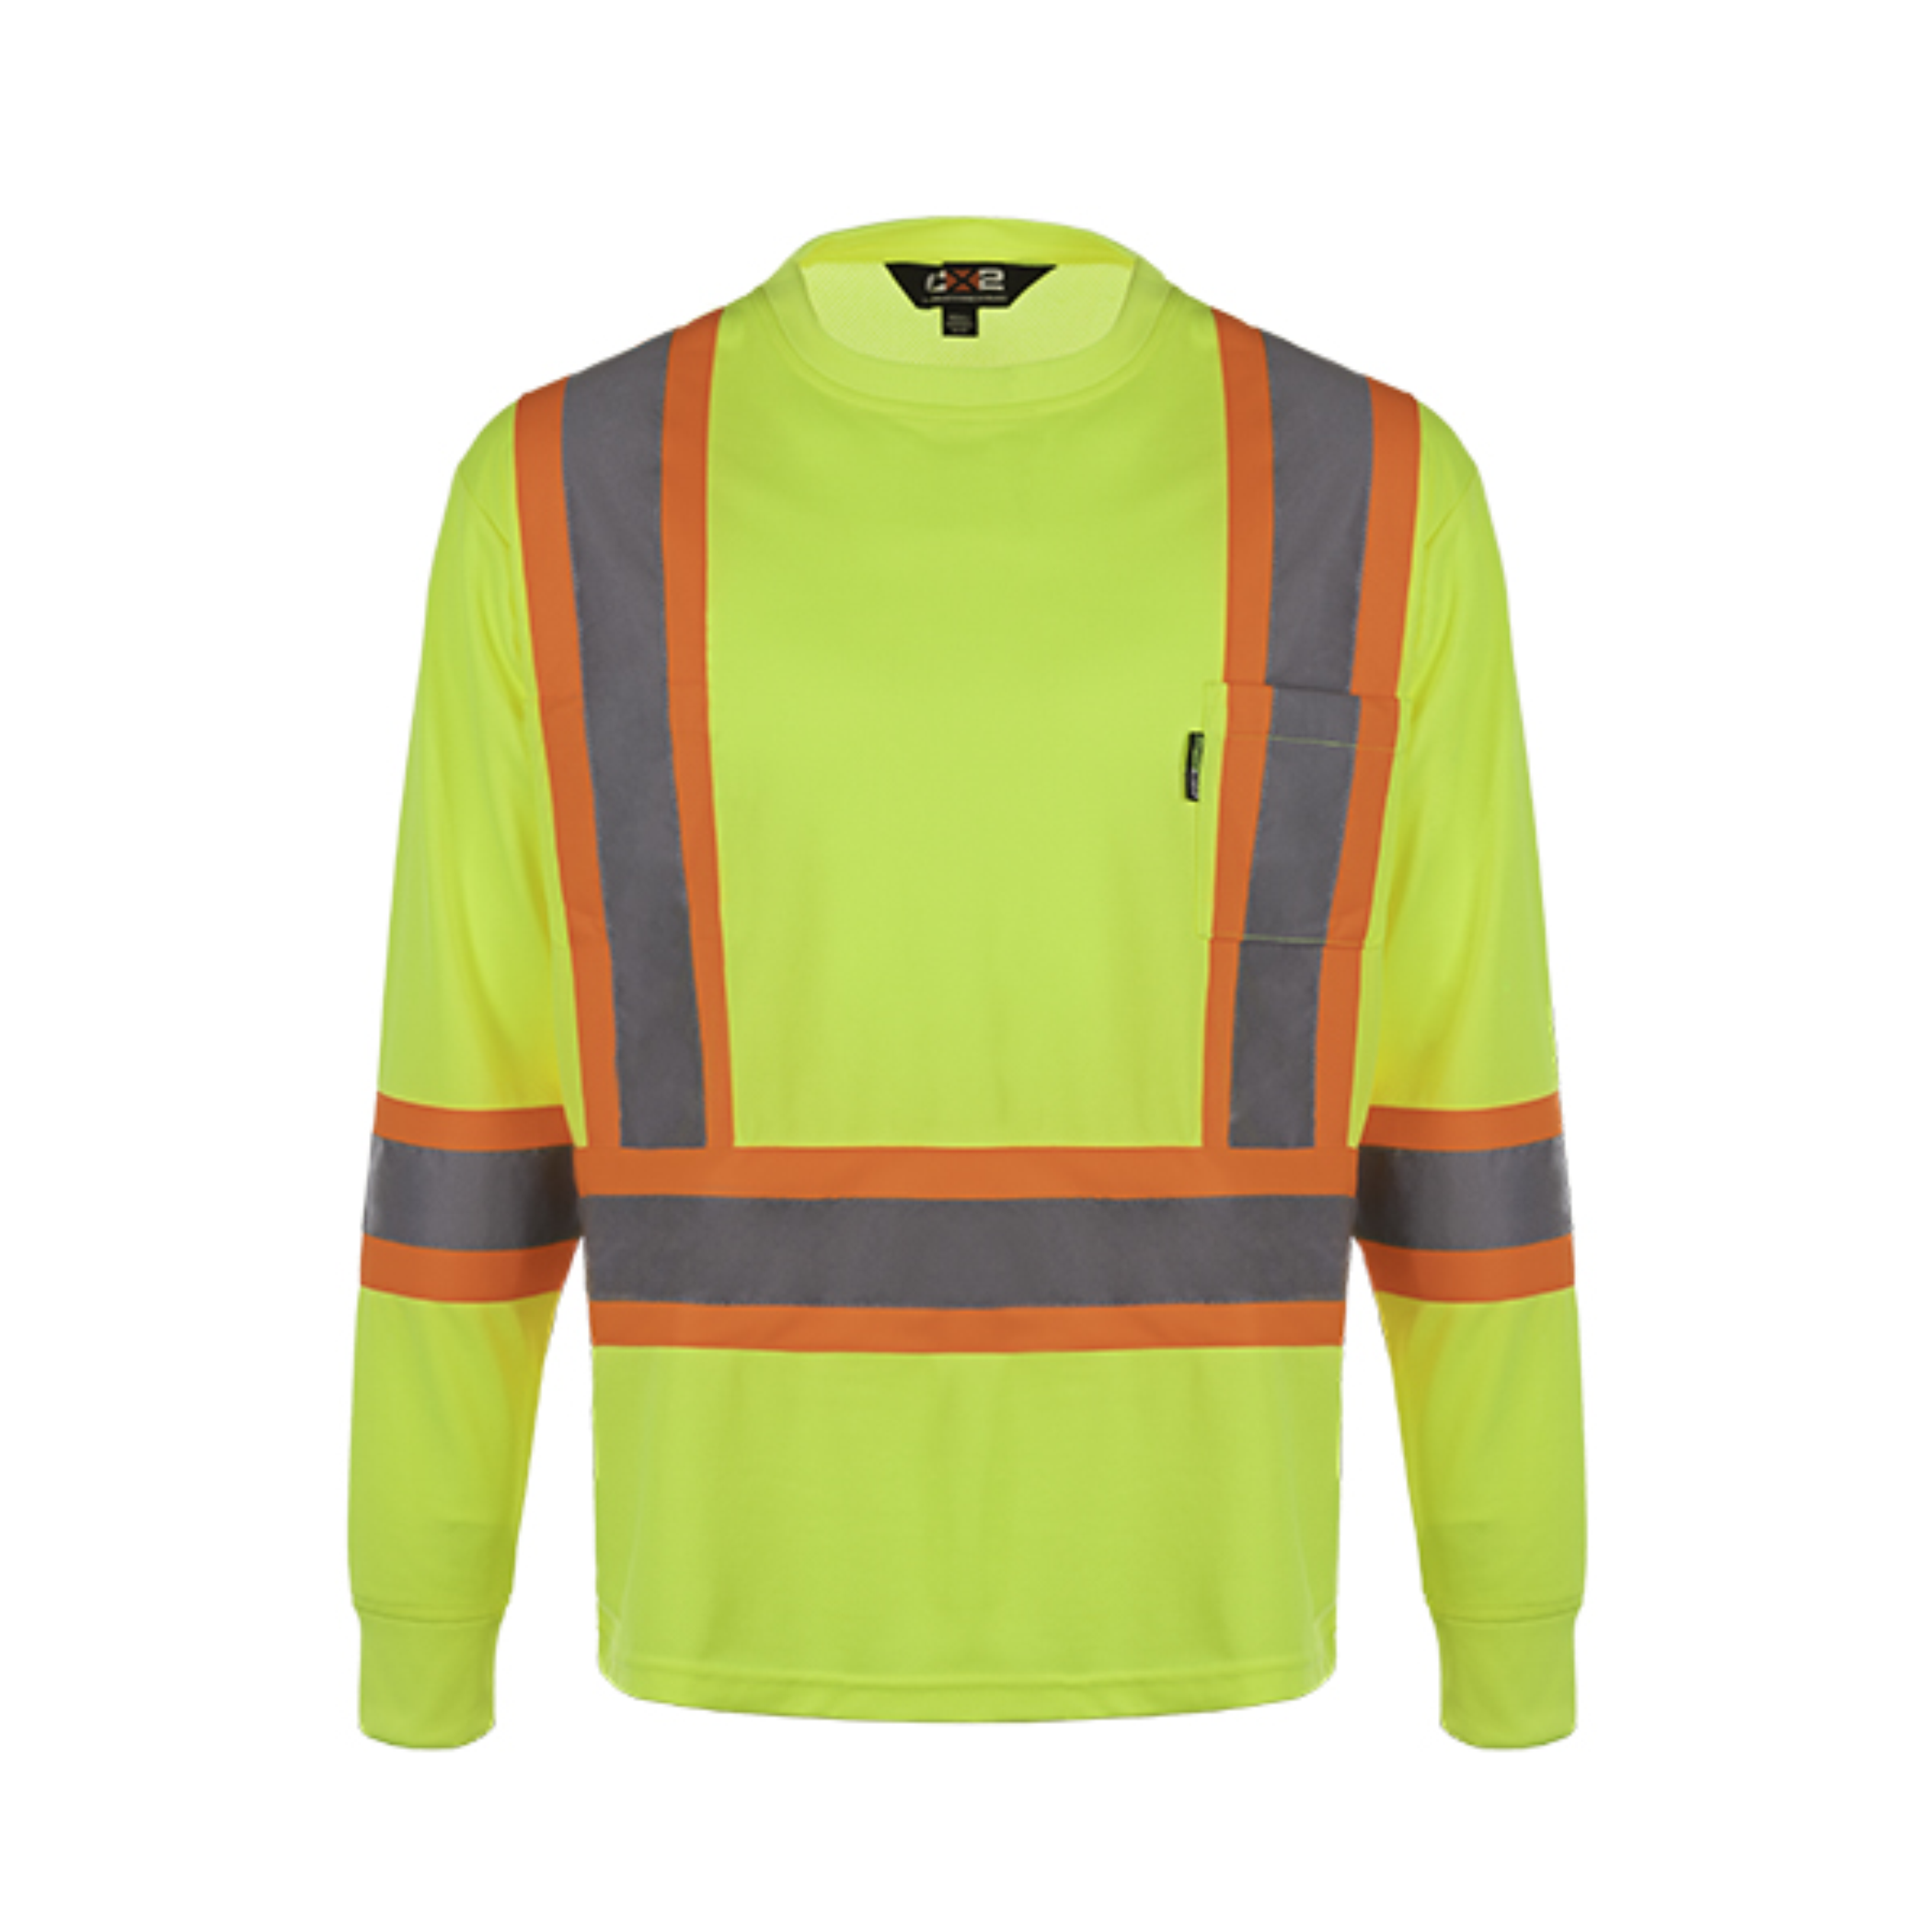 Safety Long Sleeve Shirt - CX-2 S05970